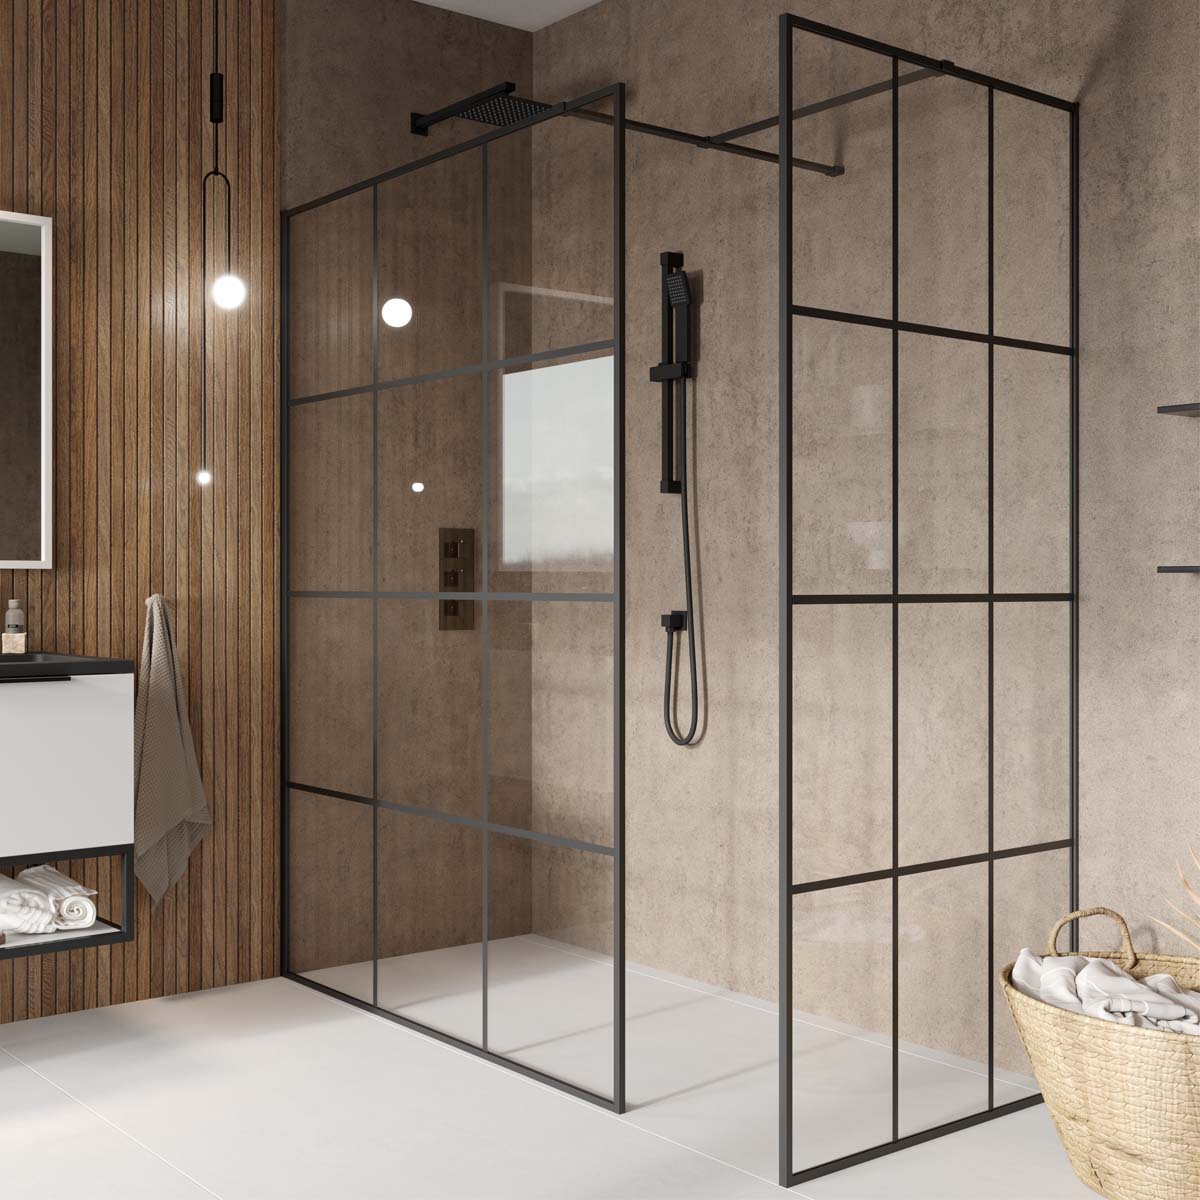 S8 Grid Walk In Wetroom Configuration - Prices From £460.00